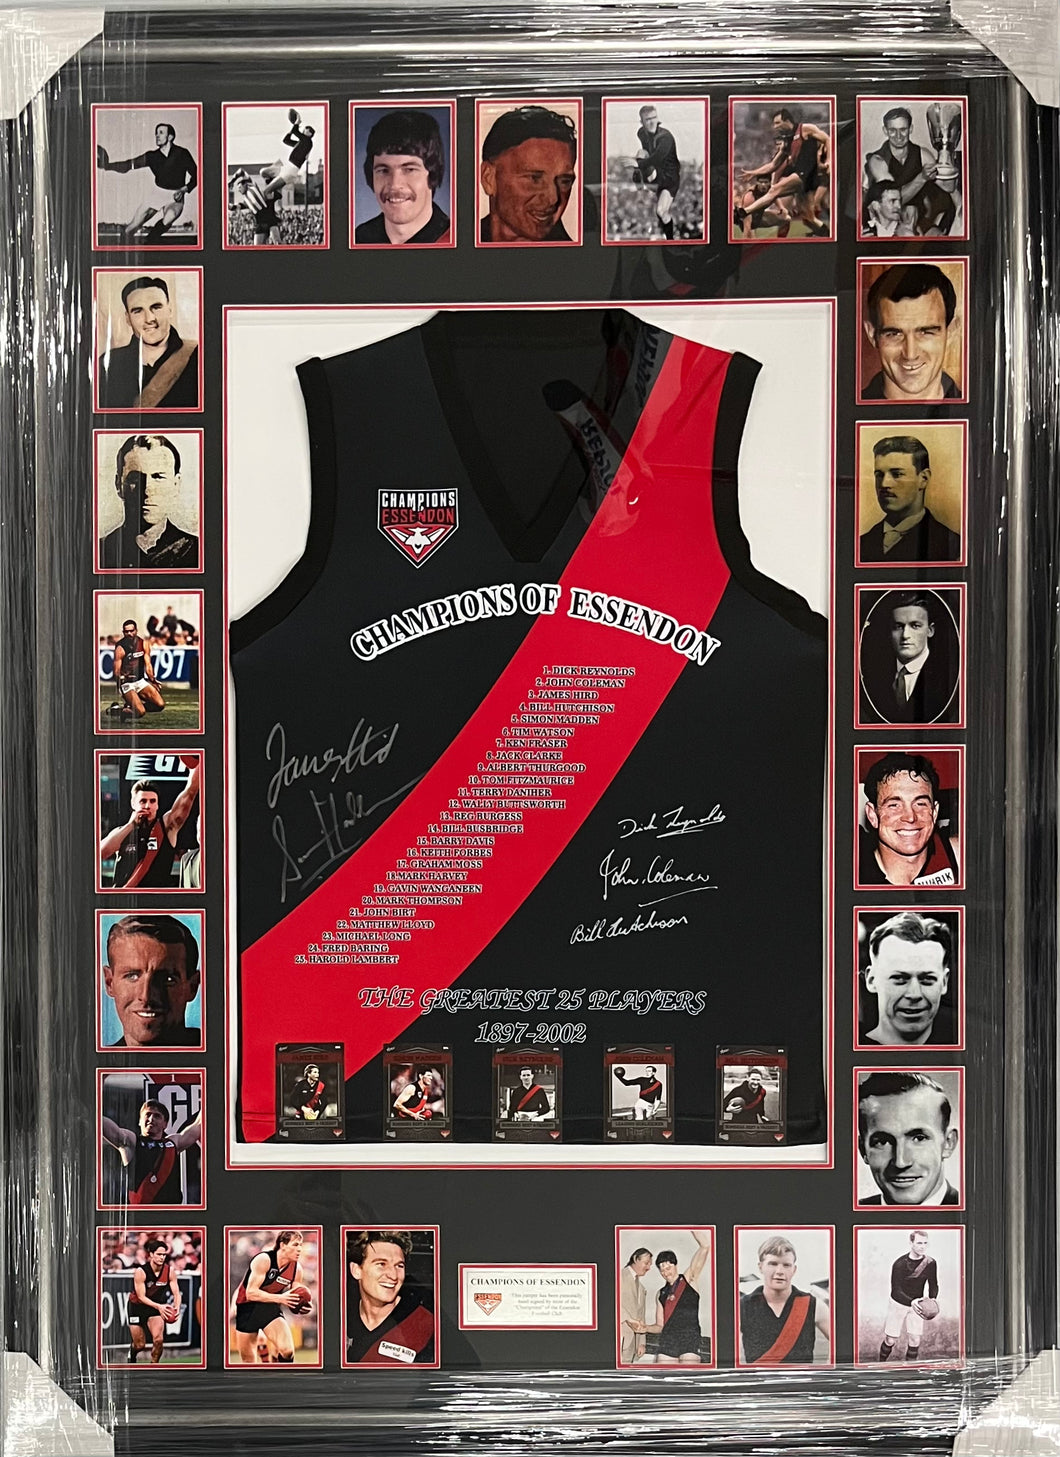 JAMES HIRD & SIMON MADDEN Signed “Greatest 25 Players 1897-2002” Essendon Jumper Display